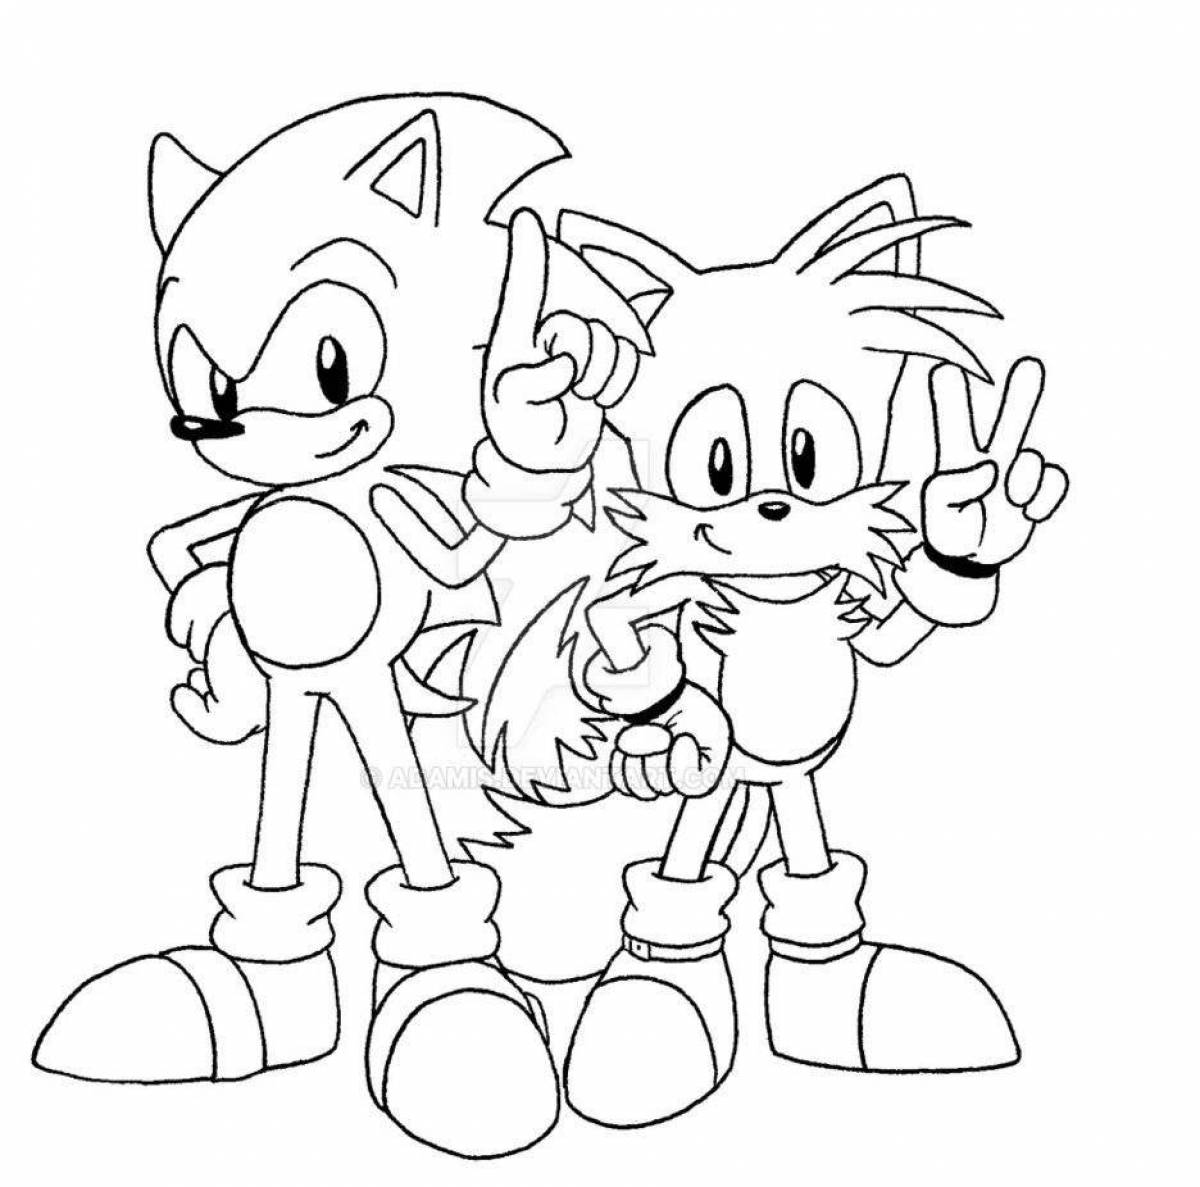 Xs sonic cute coloring page